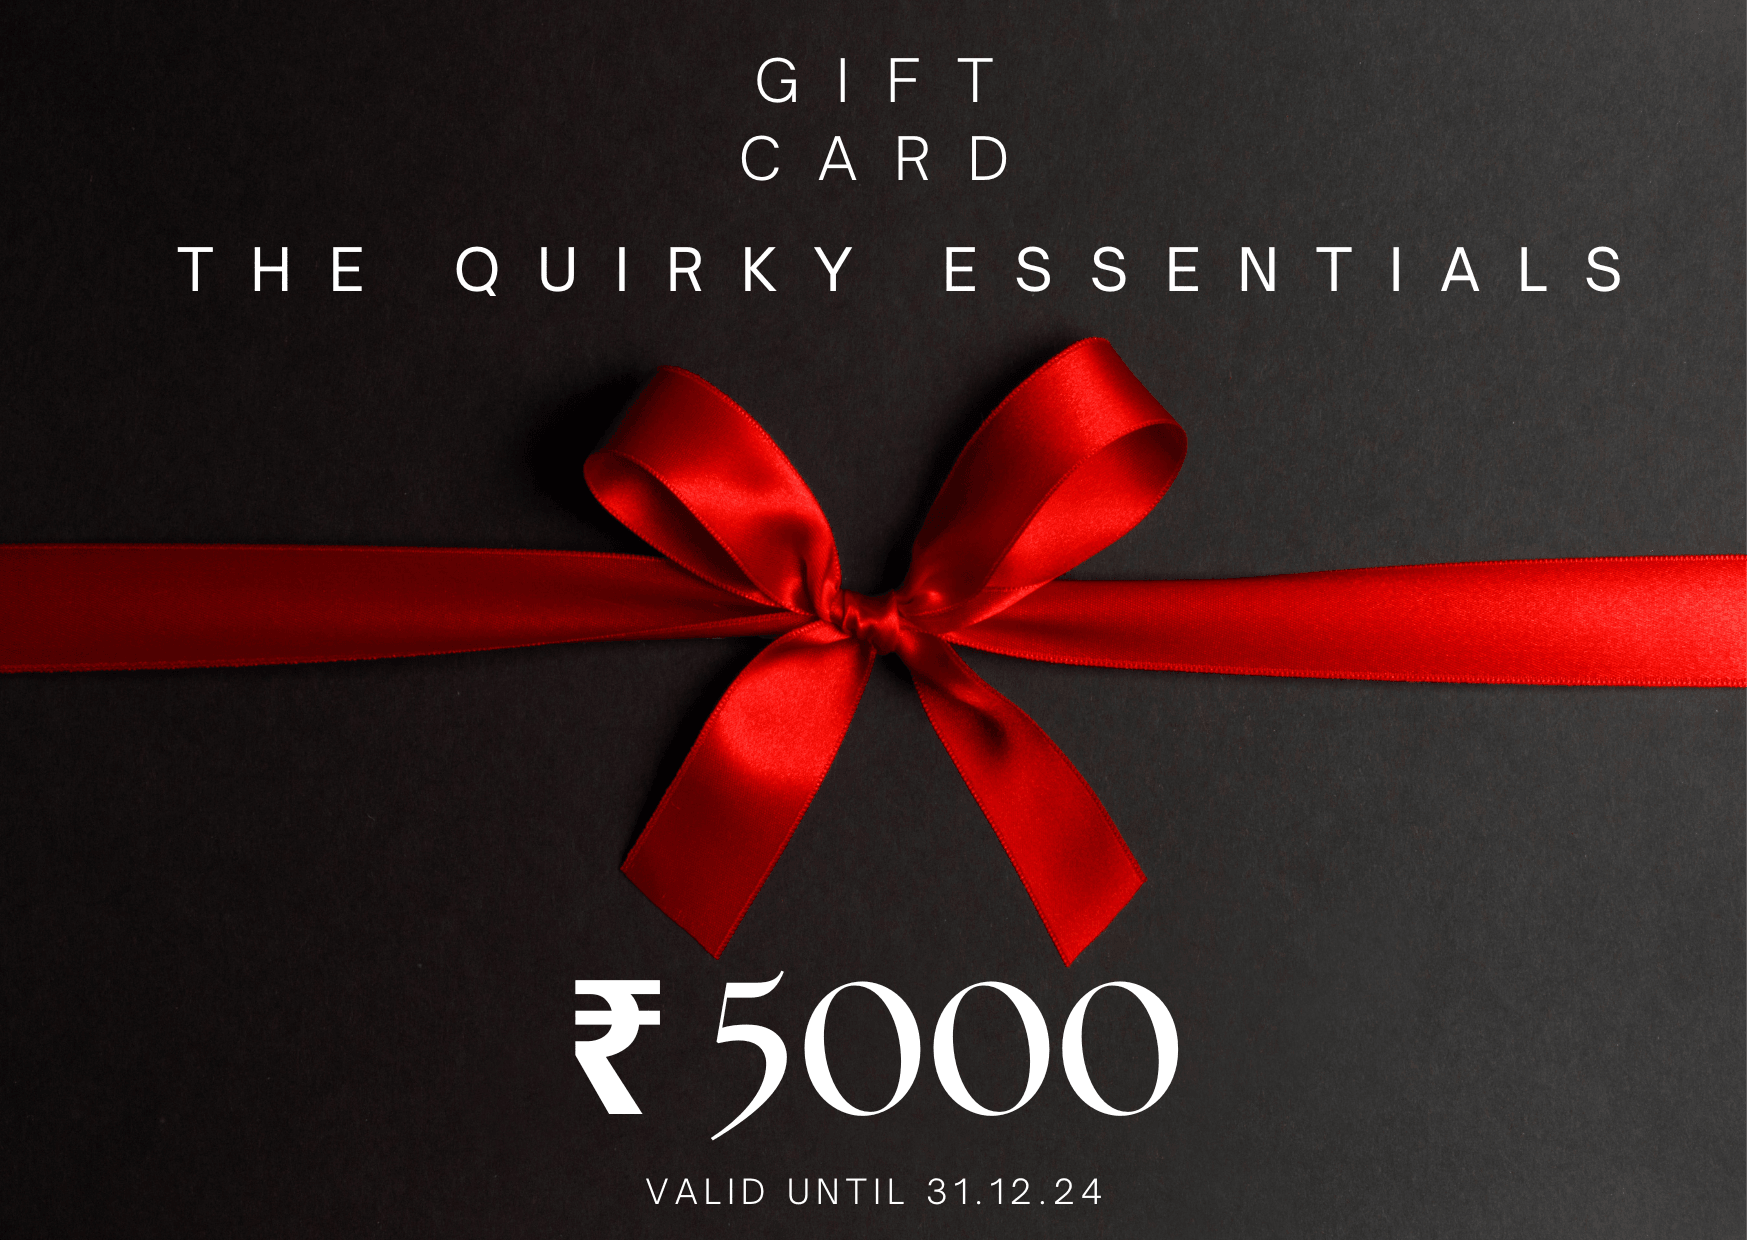 The quirky essentials gift card - The Quirky Essentials